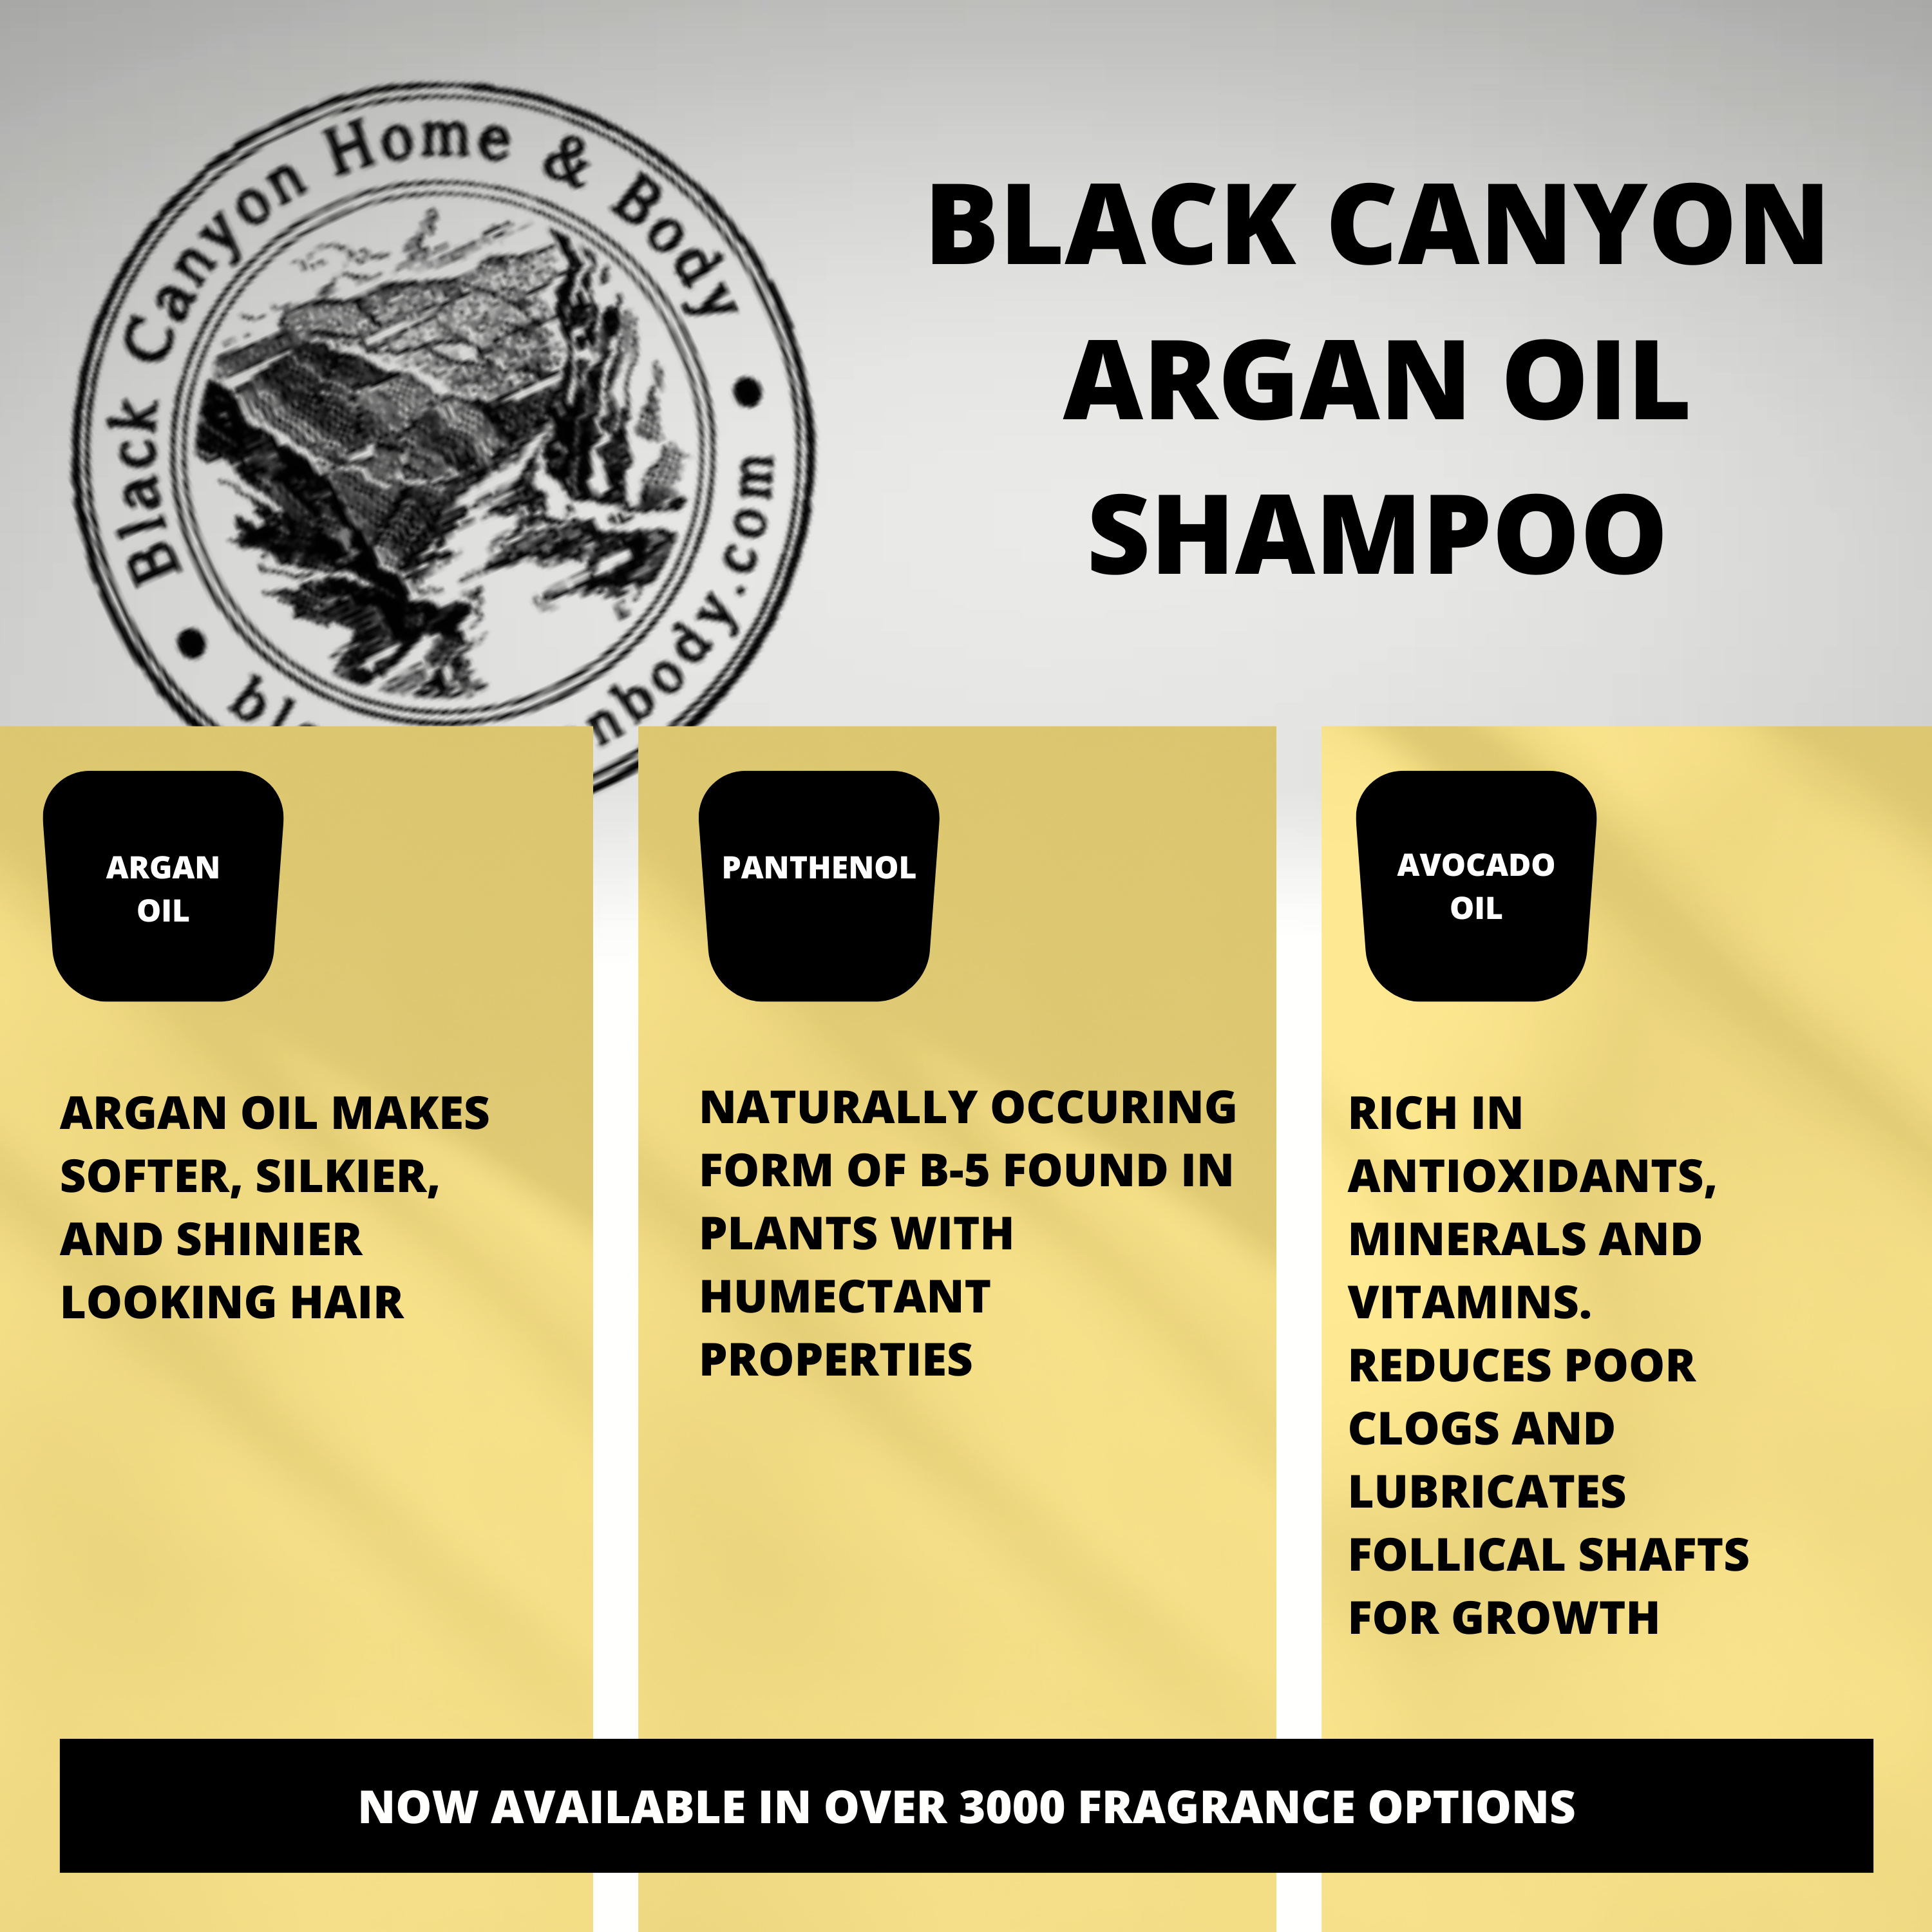 Black Canyon Apples & Oranges Scented Shampoo with Argan Oil